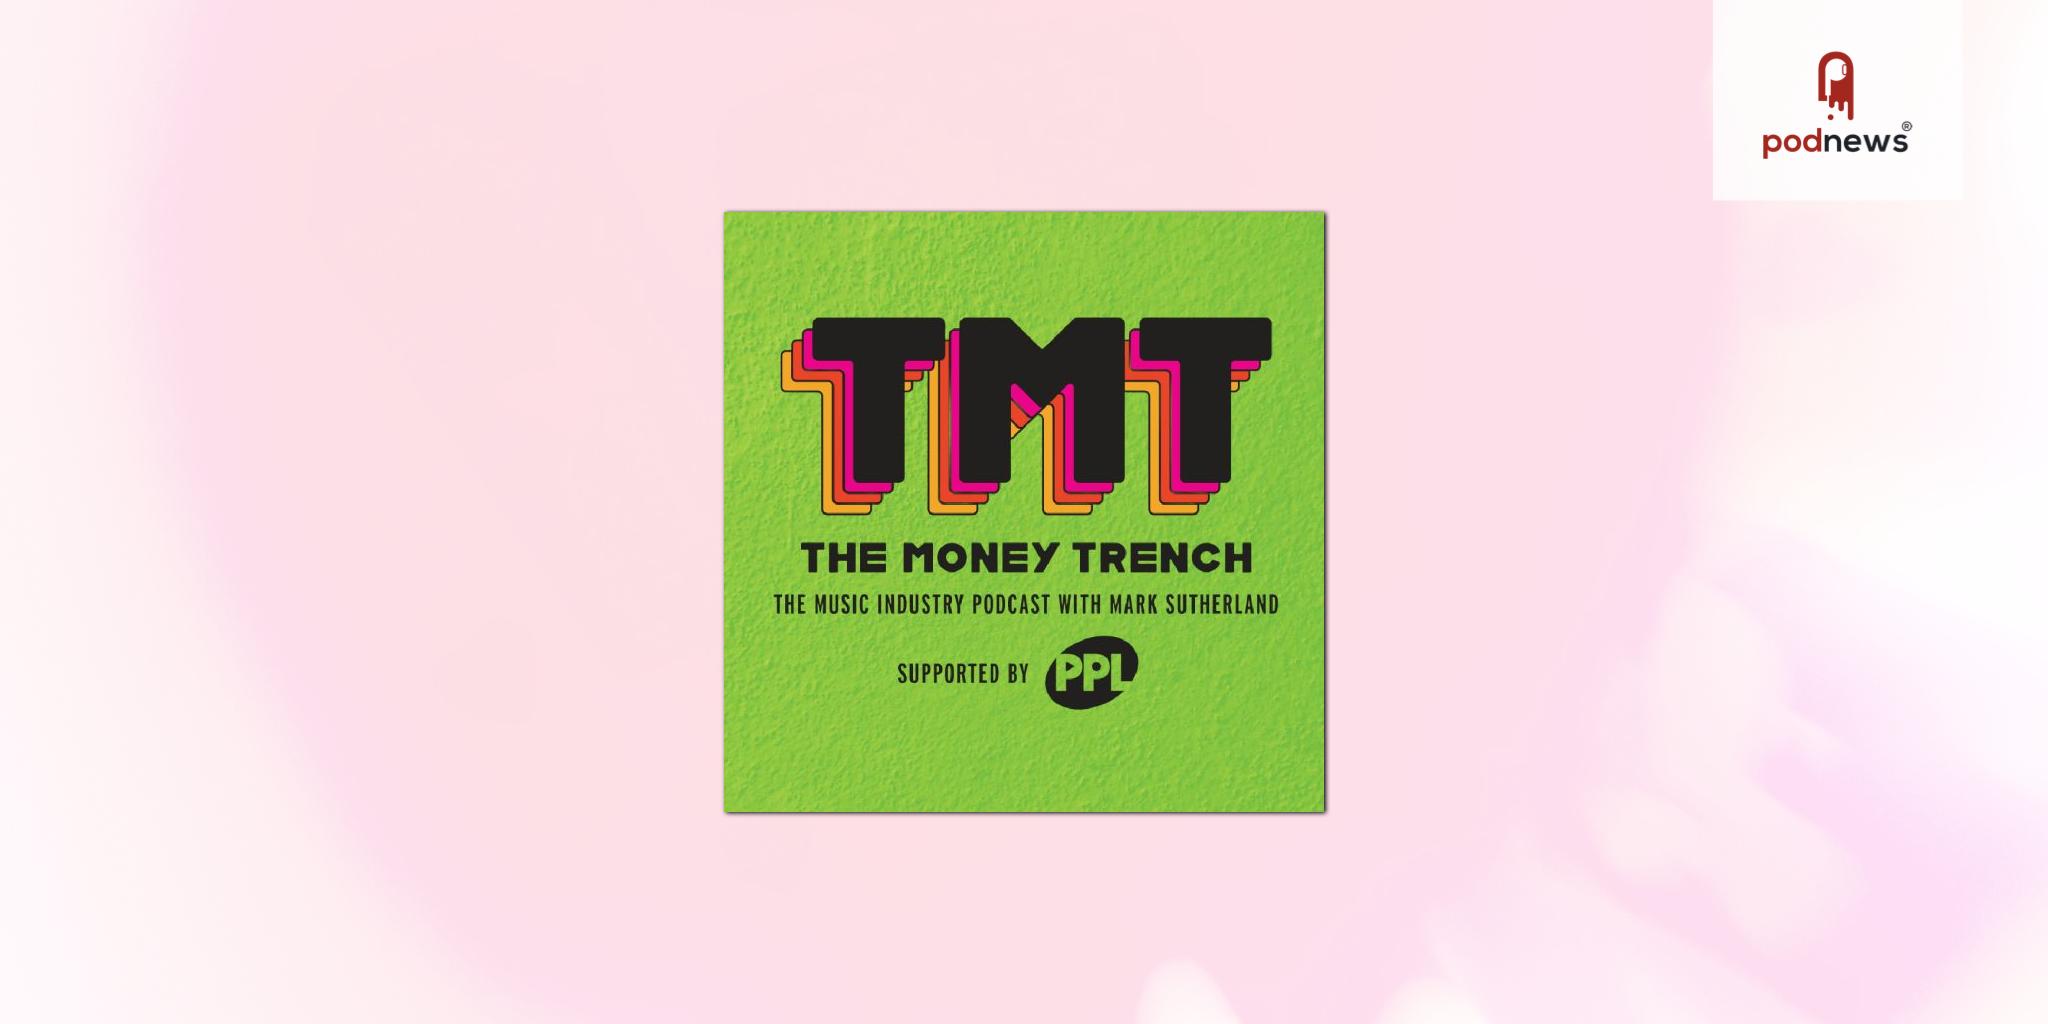 Globally respected music journalist launches new podcast, The Money Trench